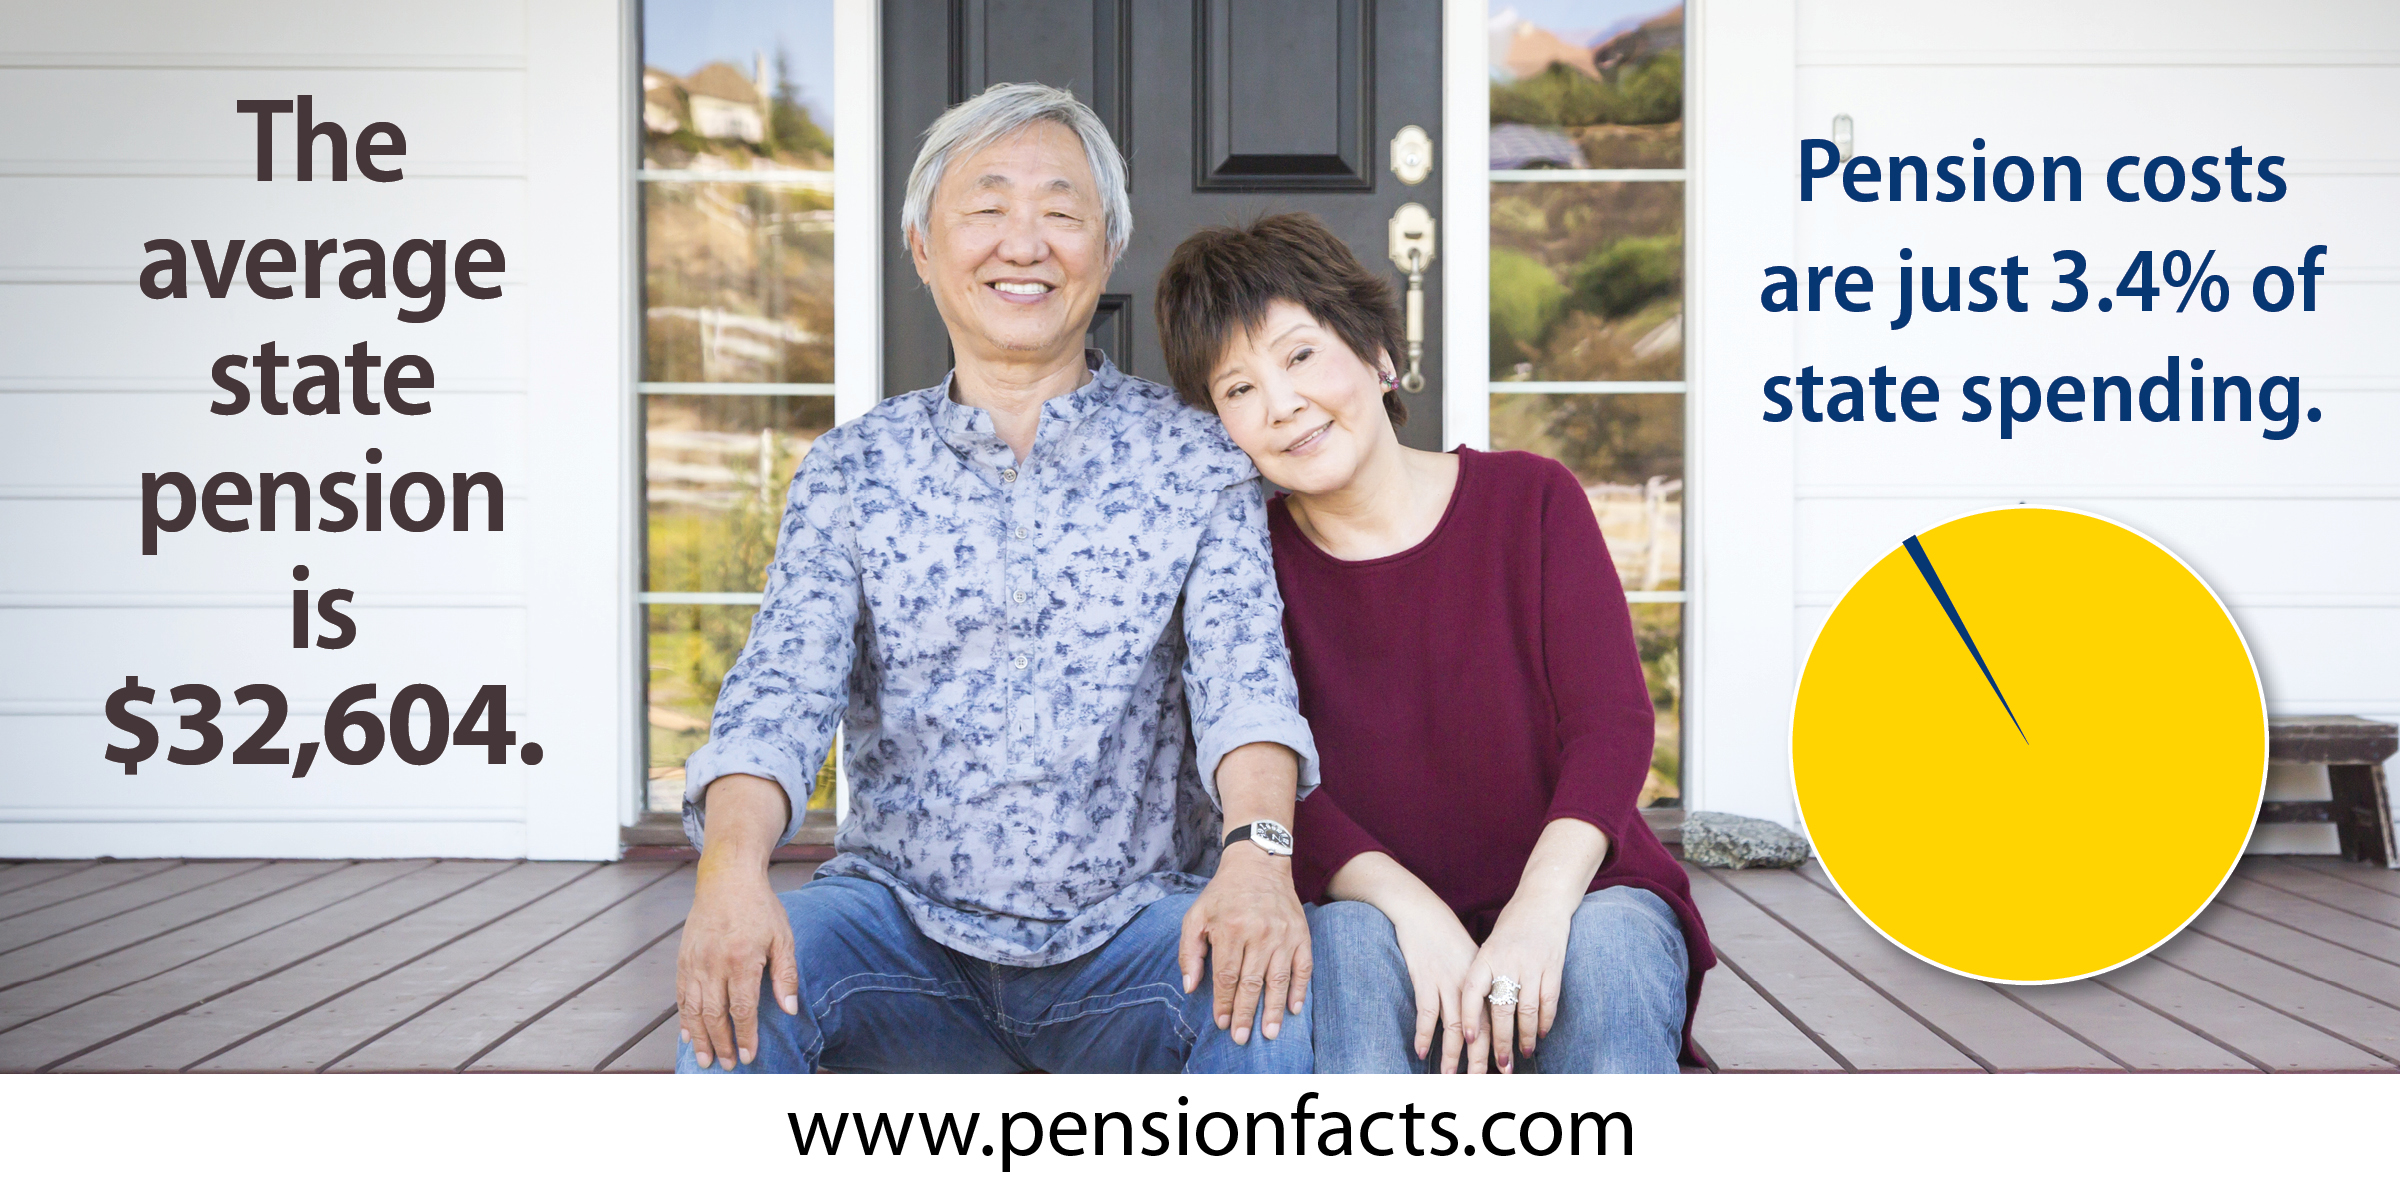 The average state pension is $32,604.